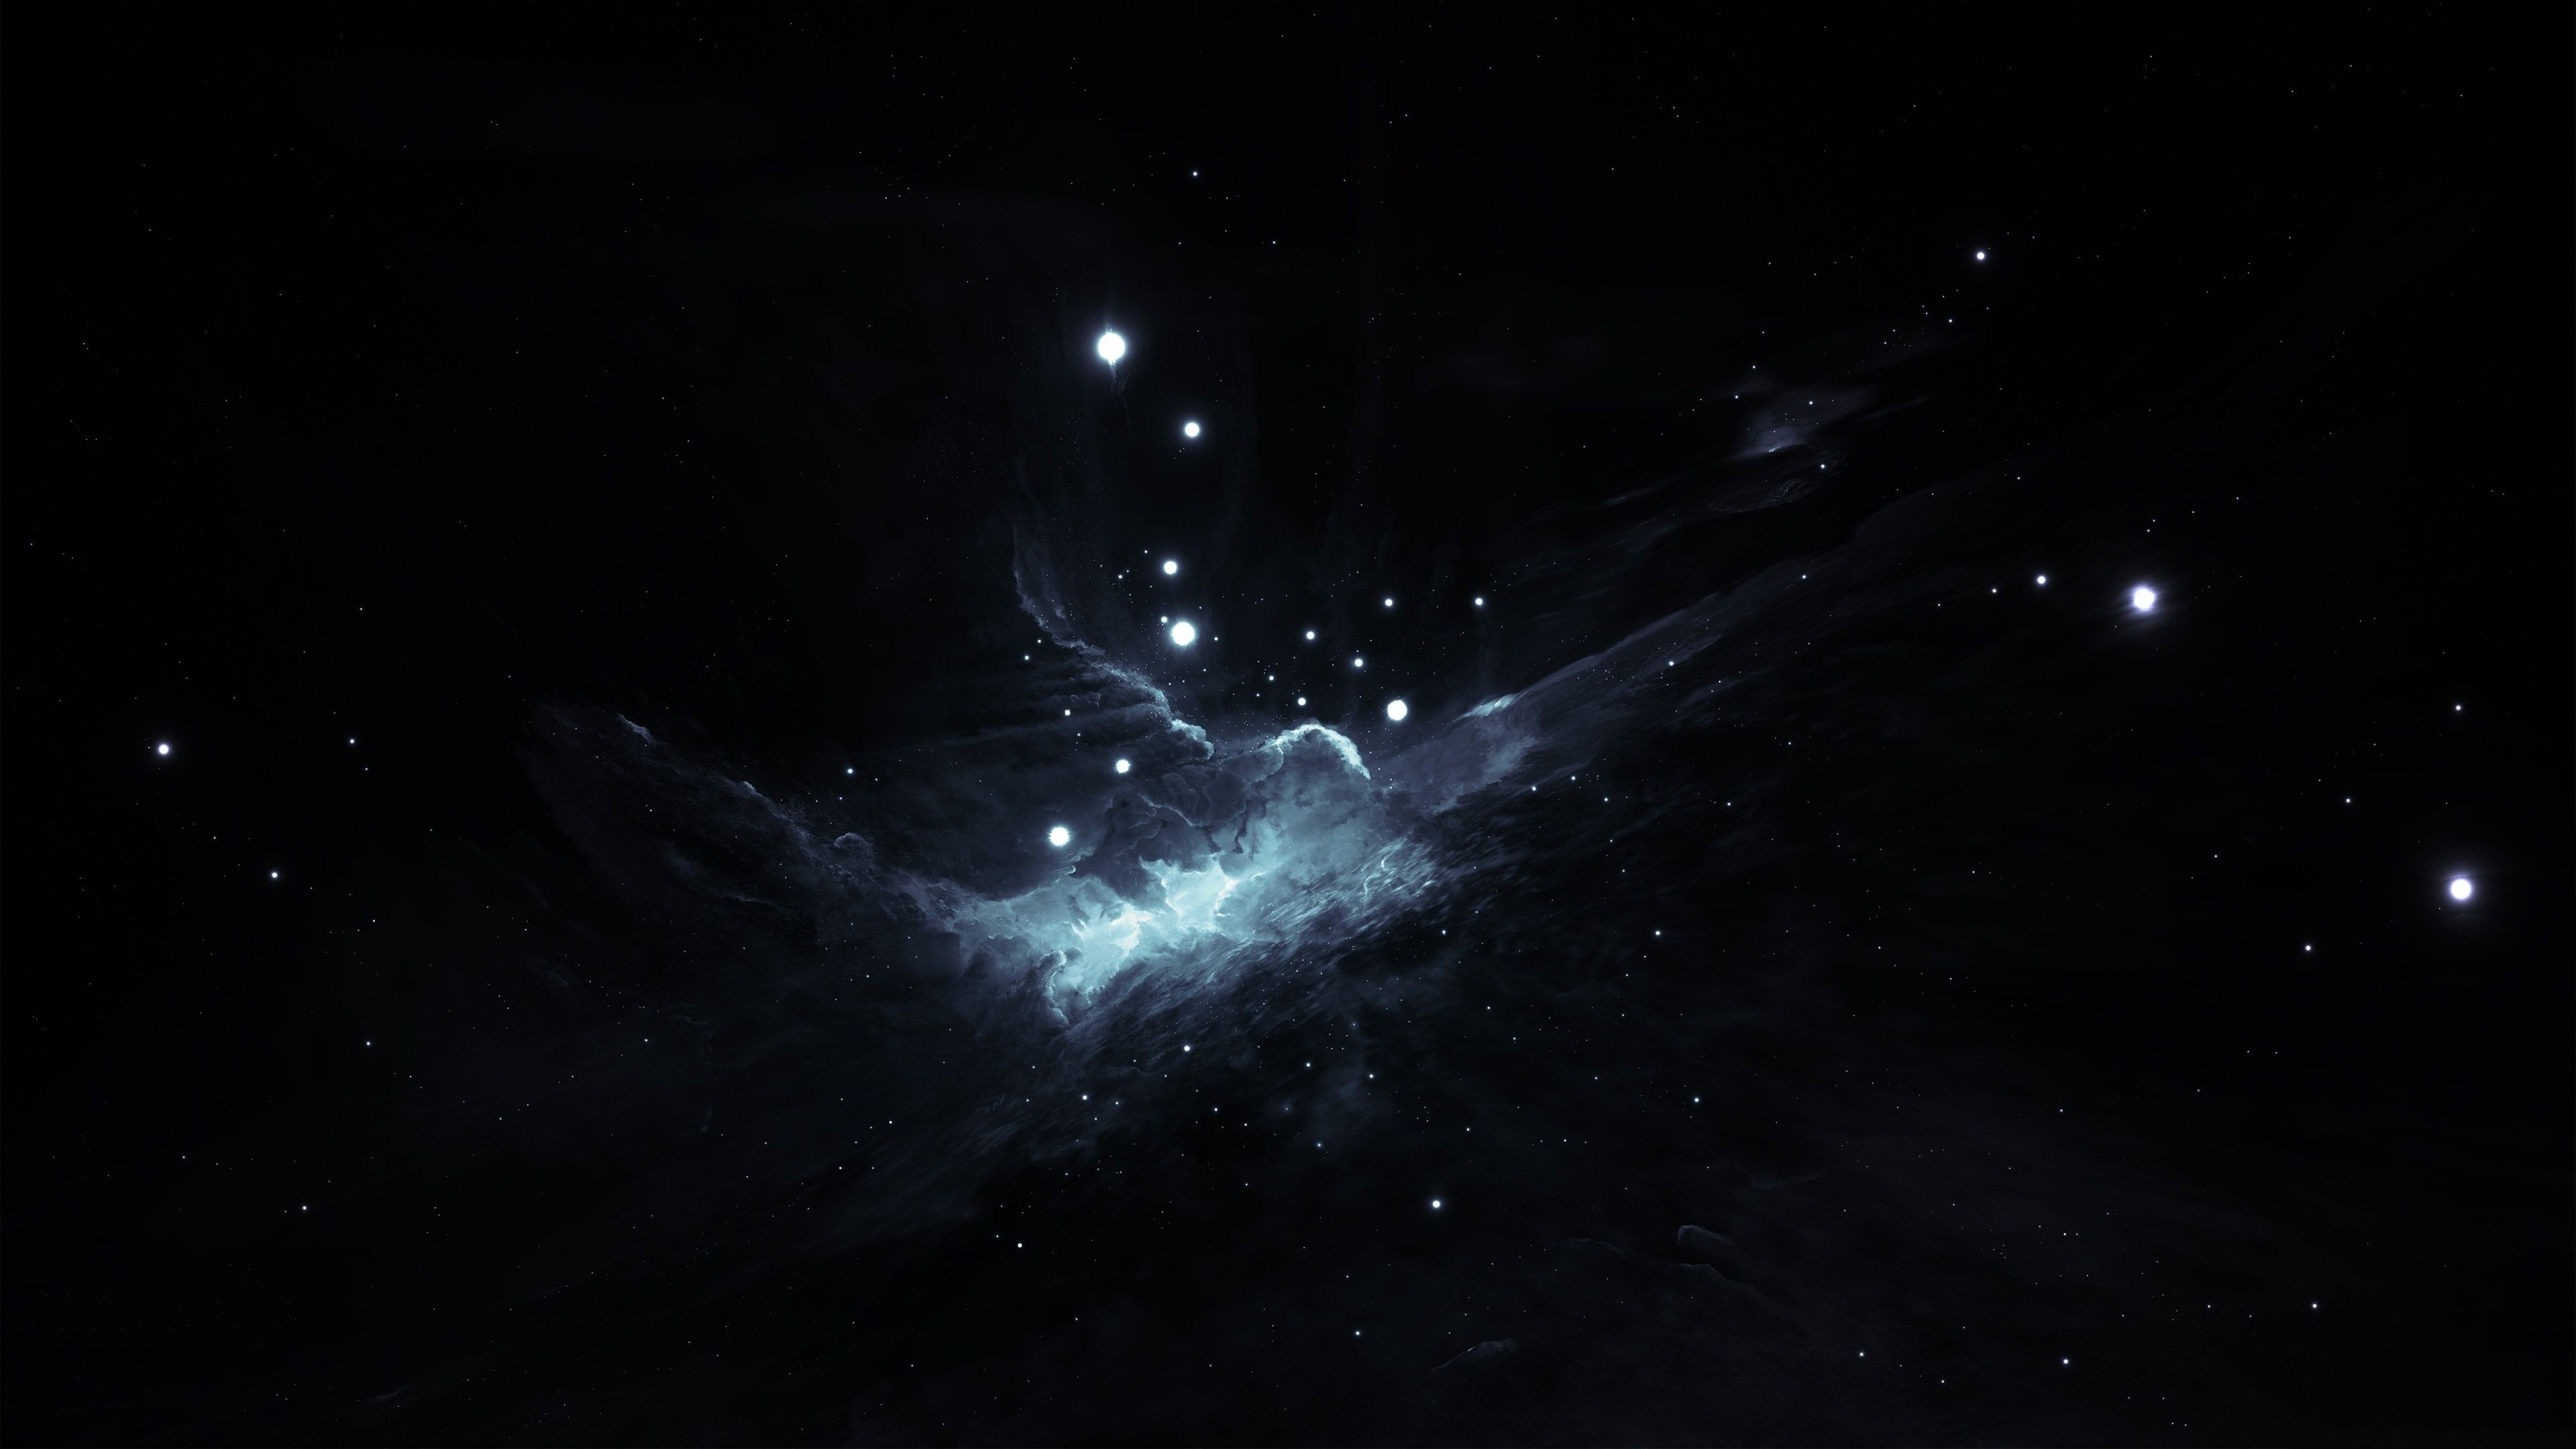 Download 3840x2400 wallpaper space, dark, clouds, galaxy, abstract, 4k, ultra HD 16: widescreen, 3840x2400 HD image, background, 5242